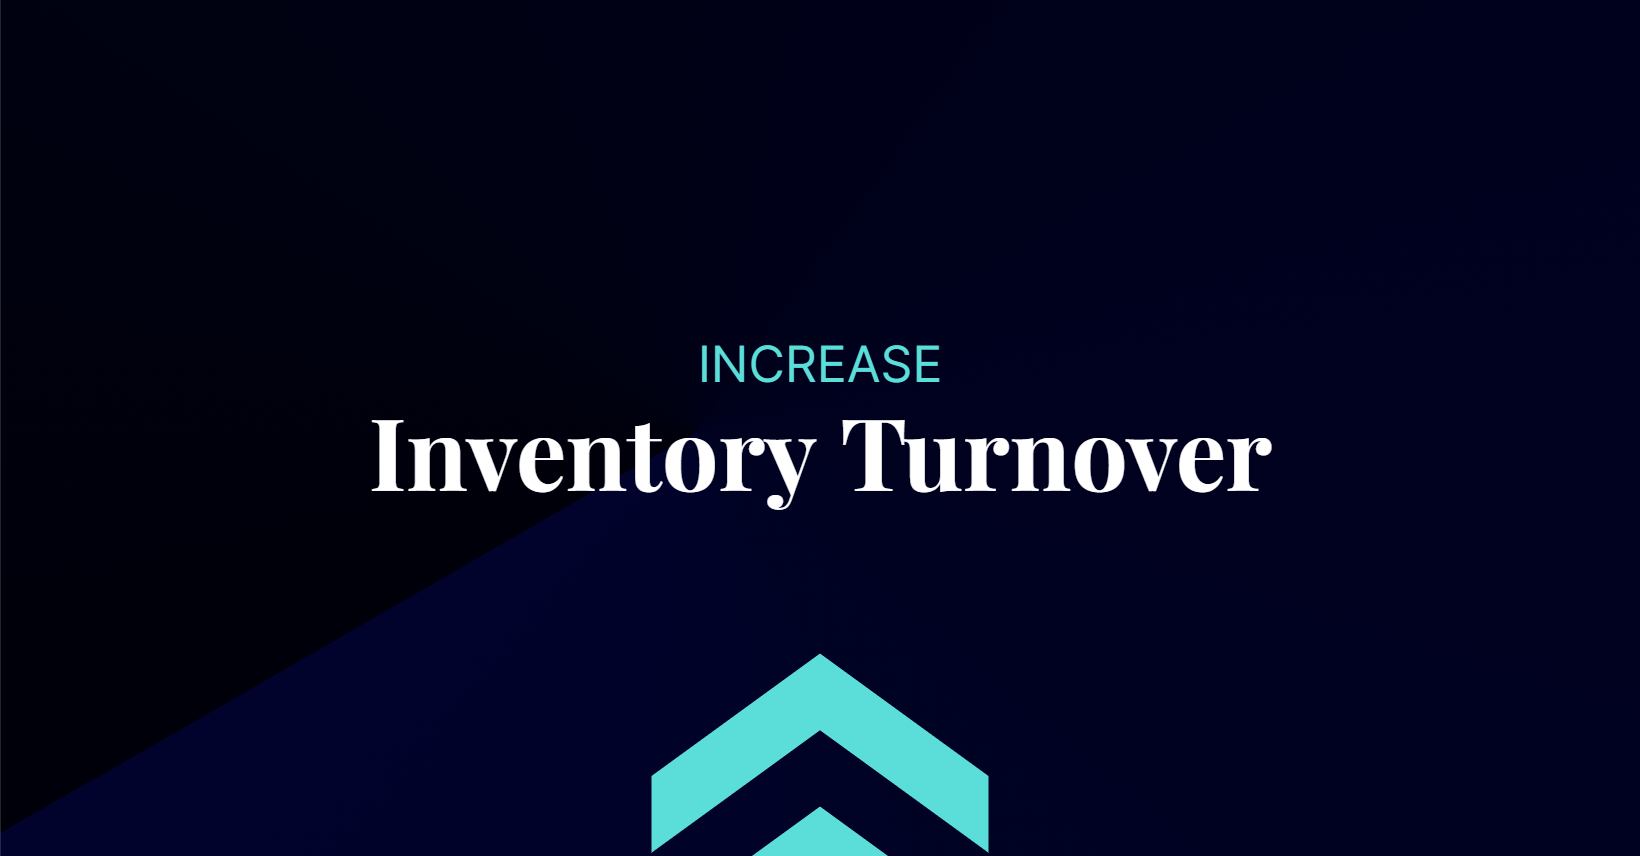 high inventory turns means